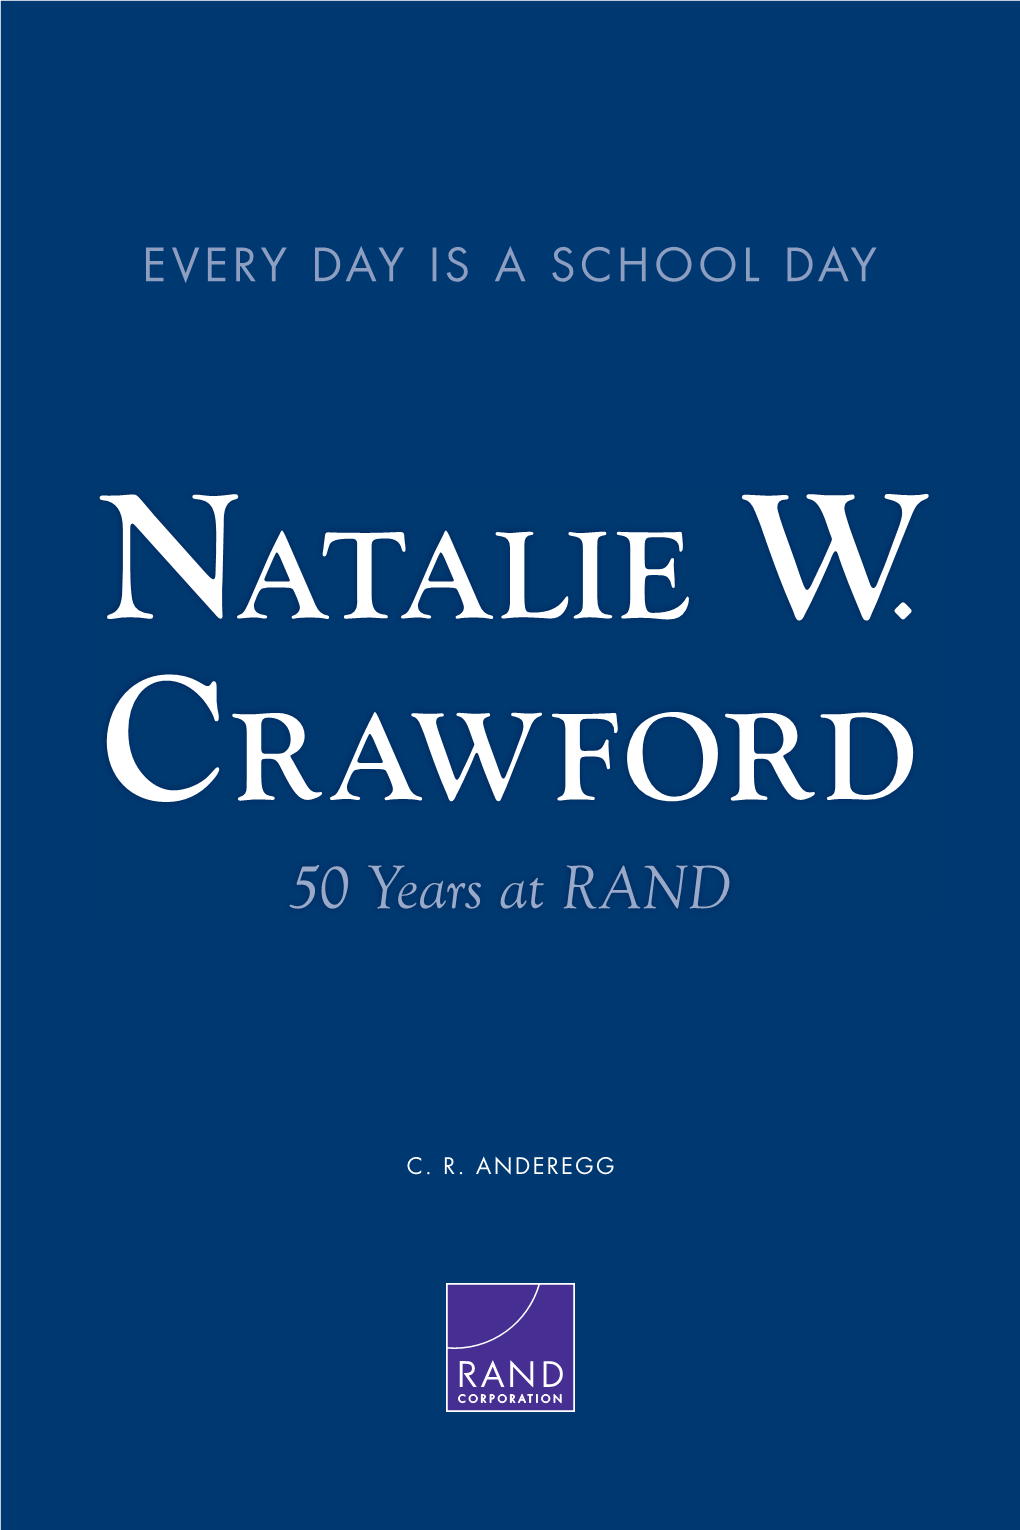 Every Day Is a School Day: Natalie W. Crawford's 50 Years at RAND